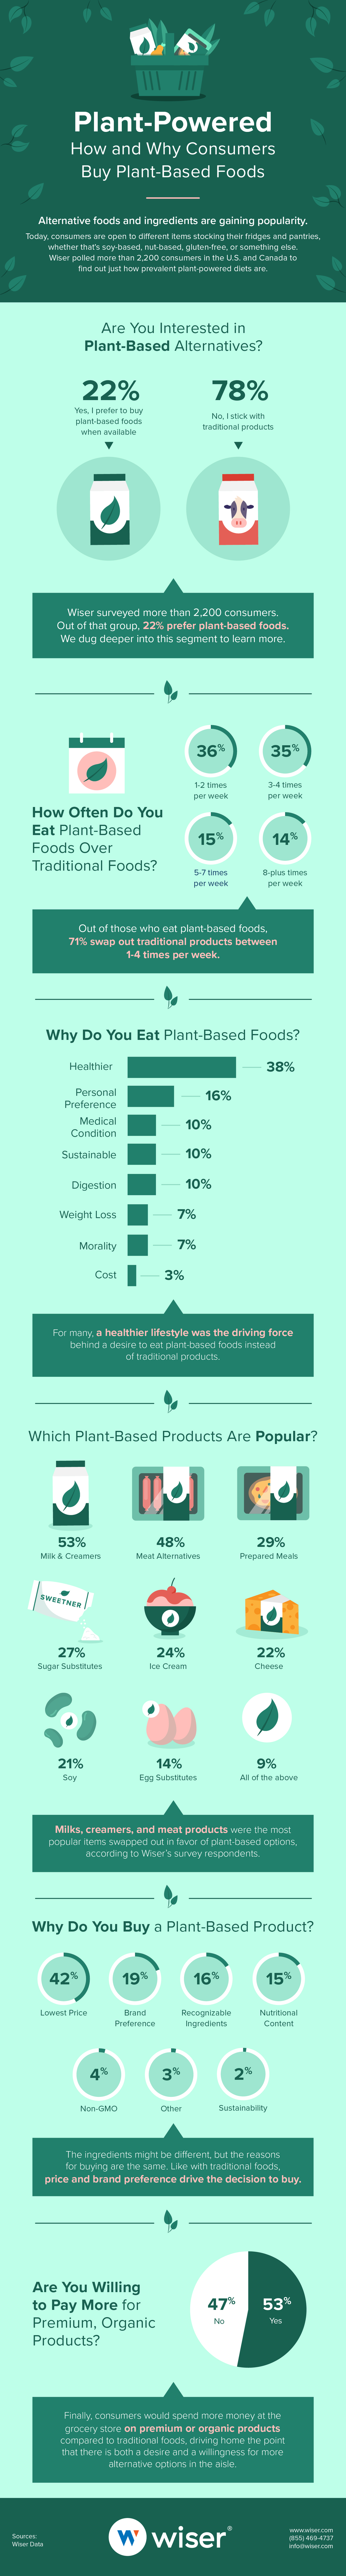 Plant-Powered Infographic